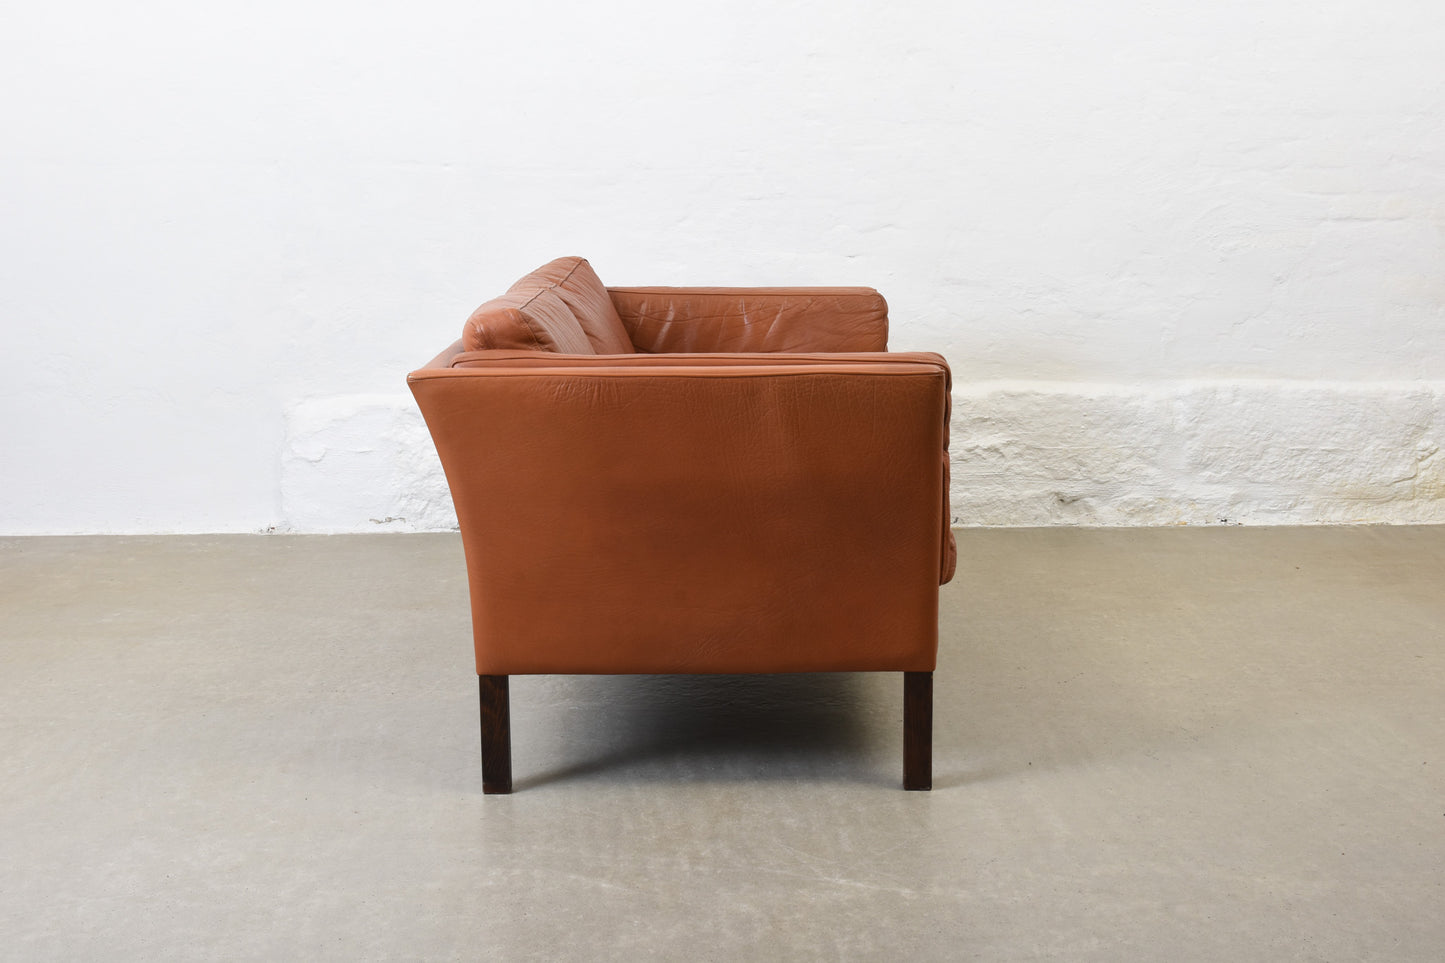 1980s Danish leather two seater